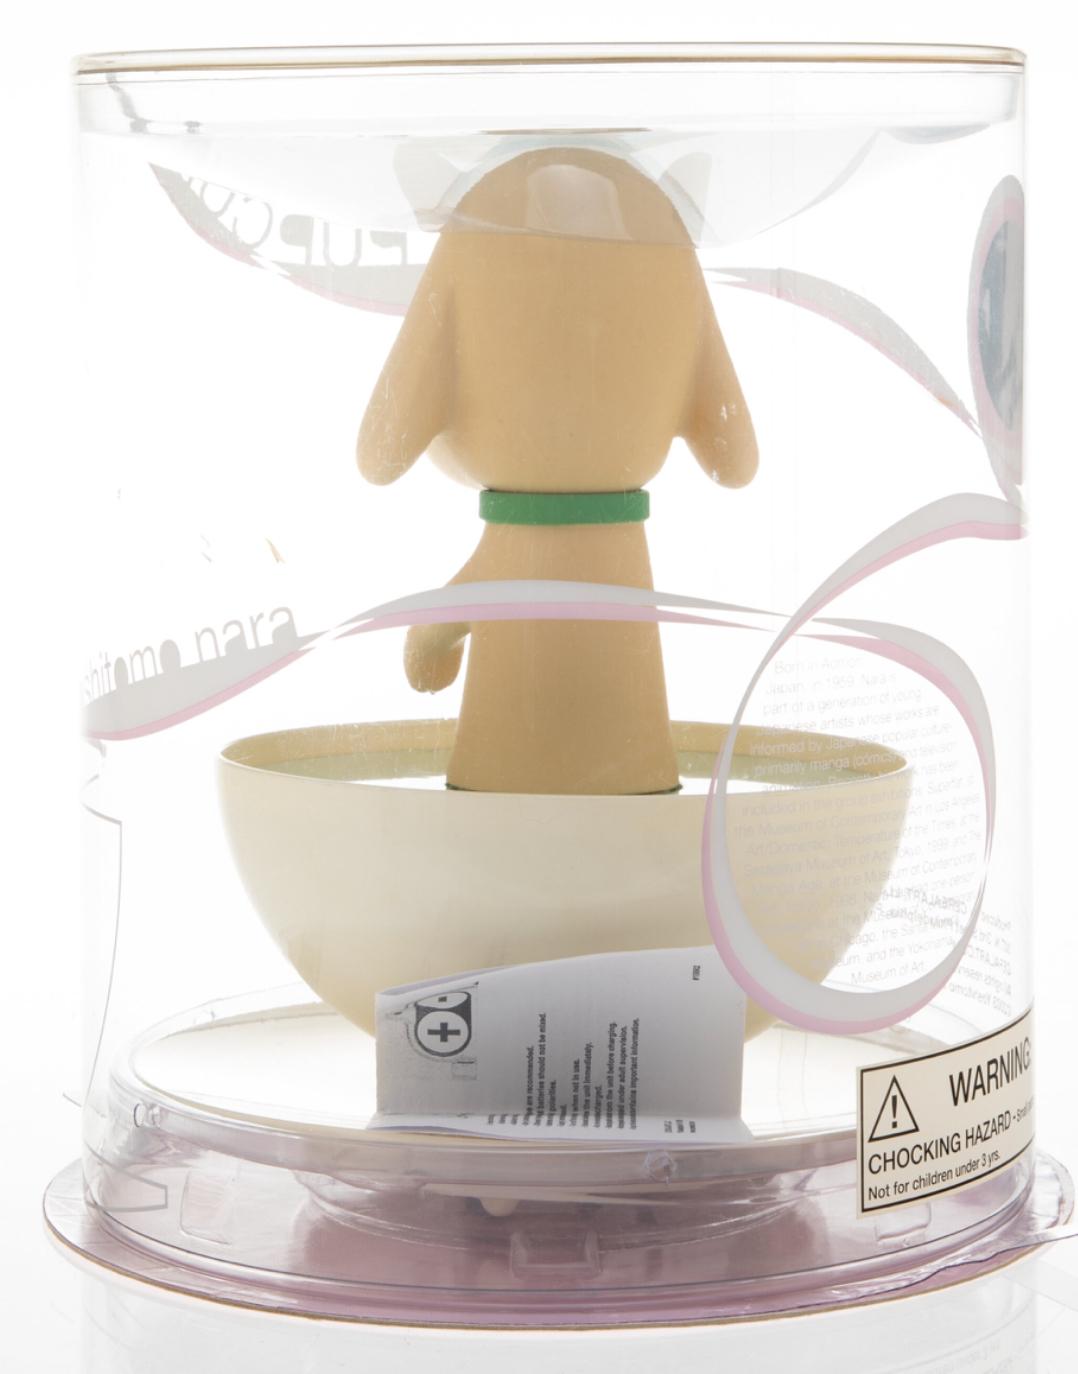 Yoshitomo Nara Pup Cup 2003:
This rare early Yoshitomo Nara Pup Cup art toy features Nara's Lonesome Puppy molded in a cup.  A nicely-sized, highly collectible Nara art toy sure to standout in any setting. 

Medium: Vinyl art toy. Year: